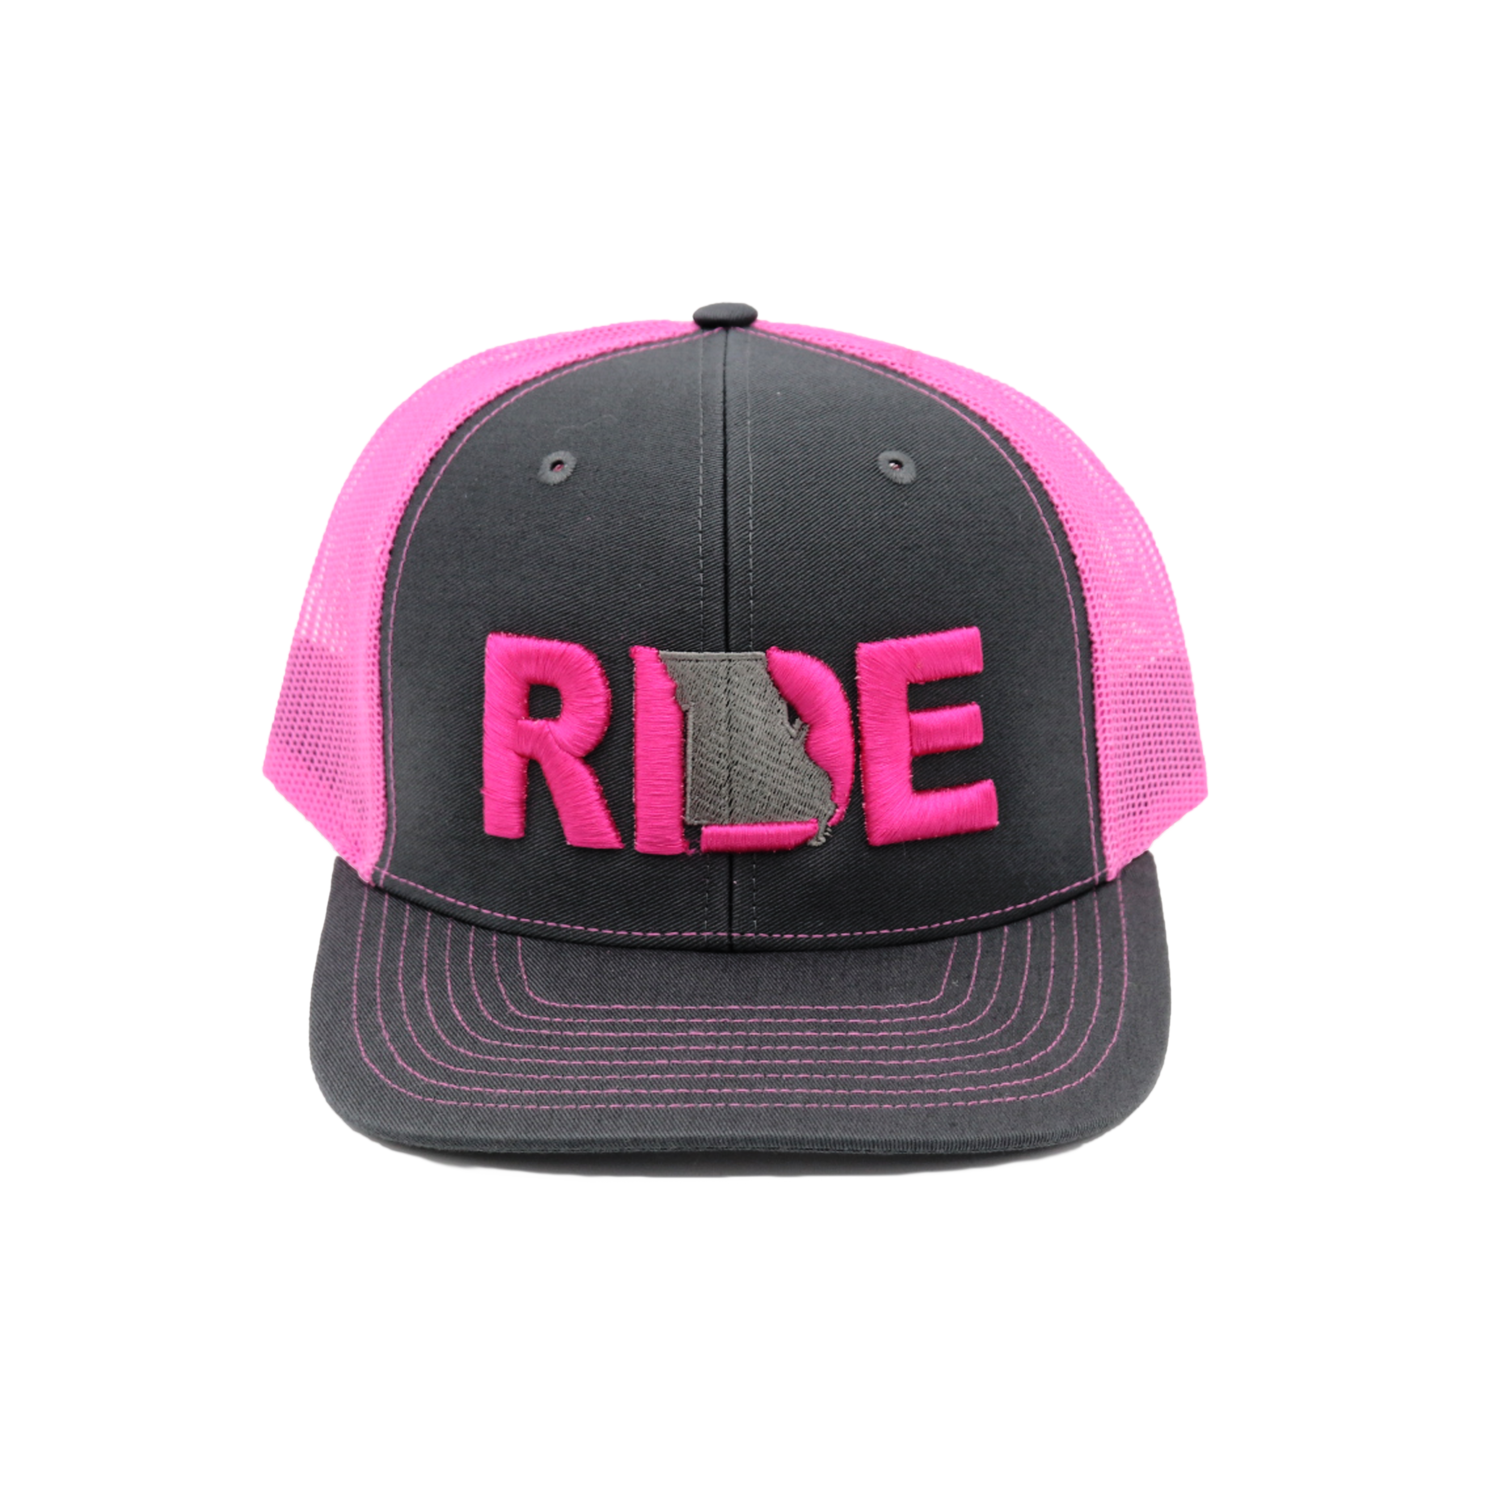 Ride Missouri Classic Pro 3D Puff Embroidered Snapback Trucker Hat Gray/Pink